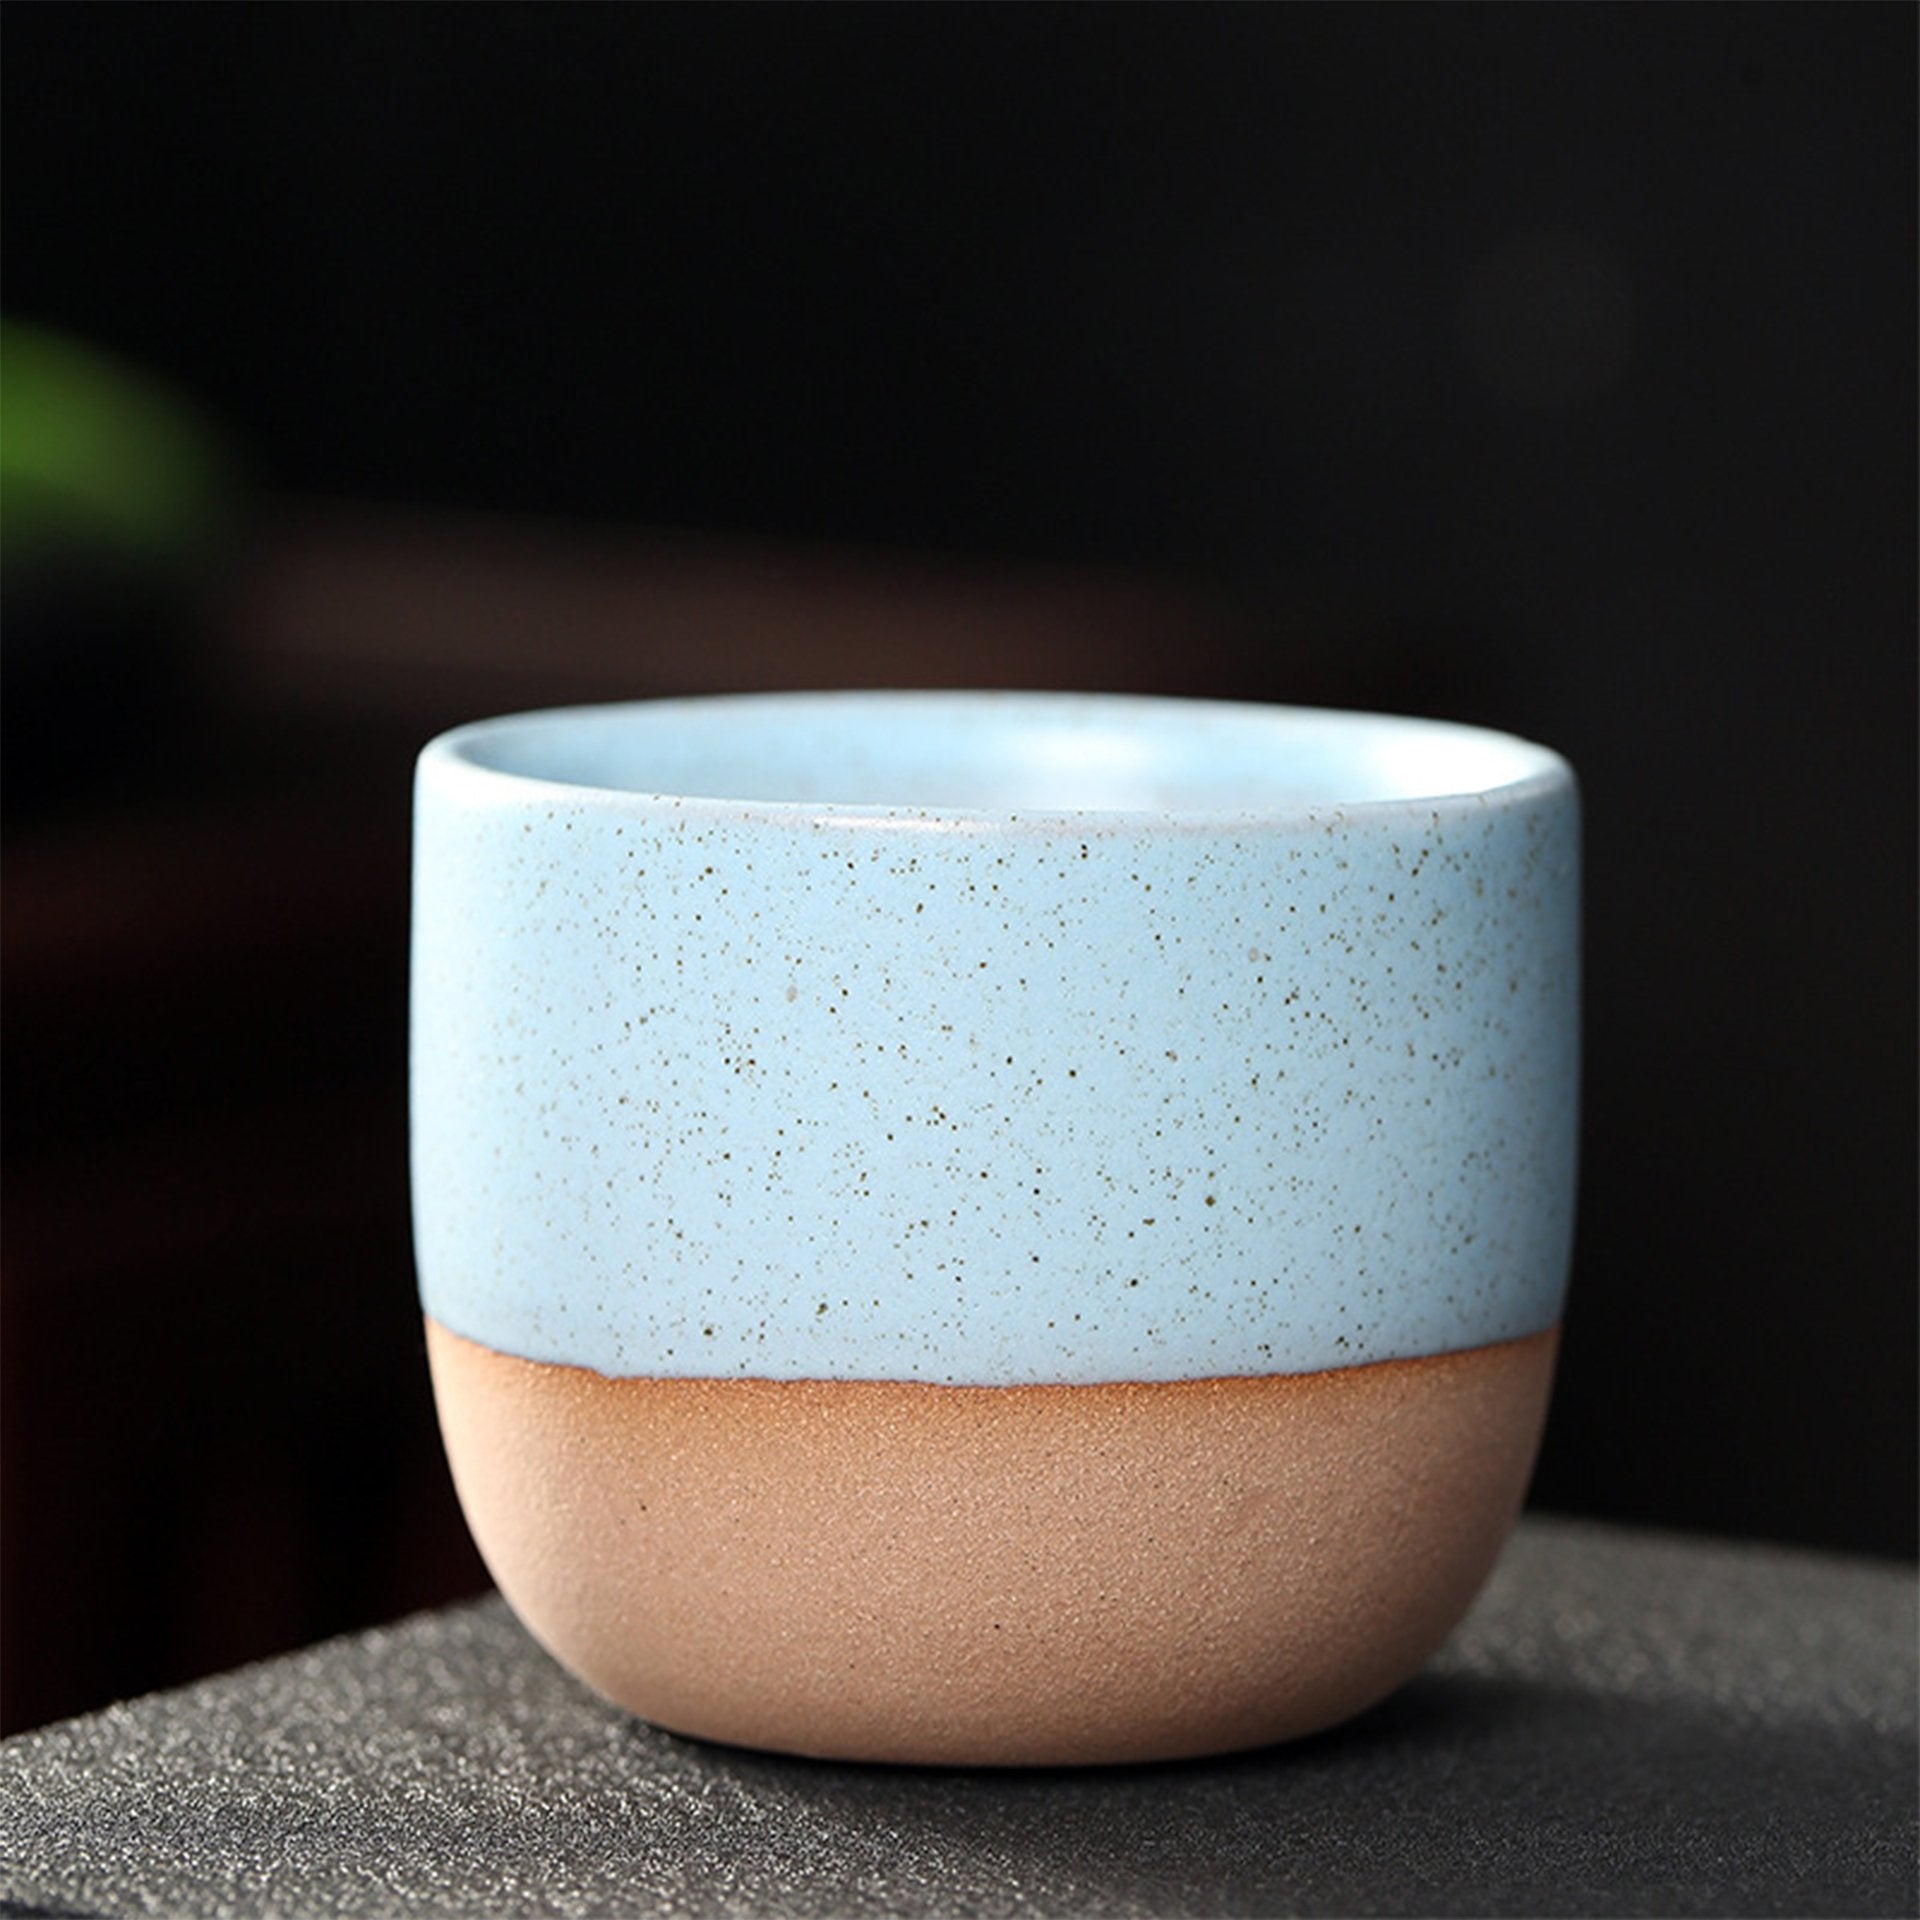 Light blue and beige two-tone ceramic teacup with speckles.